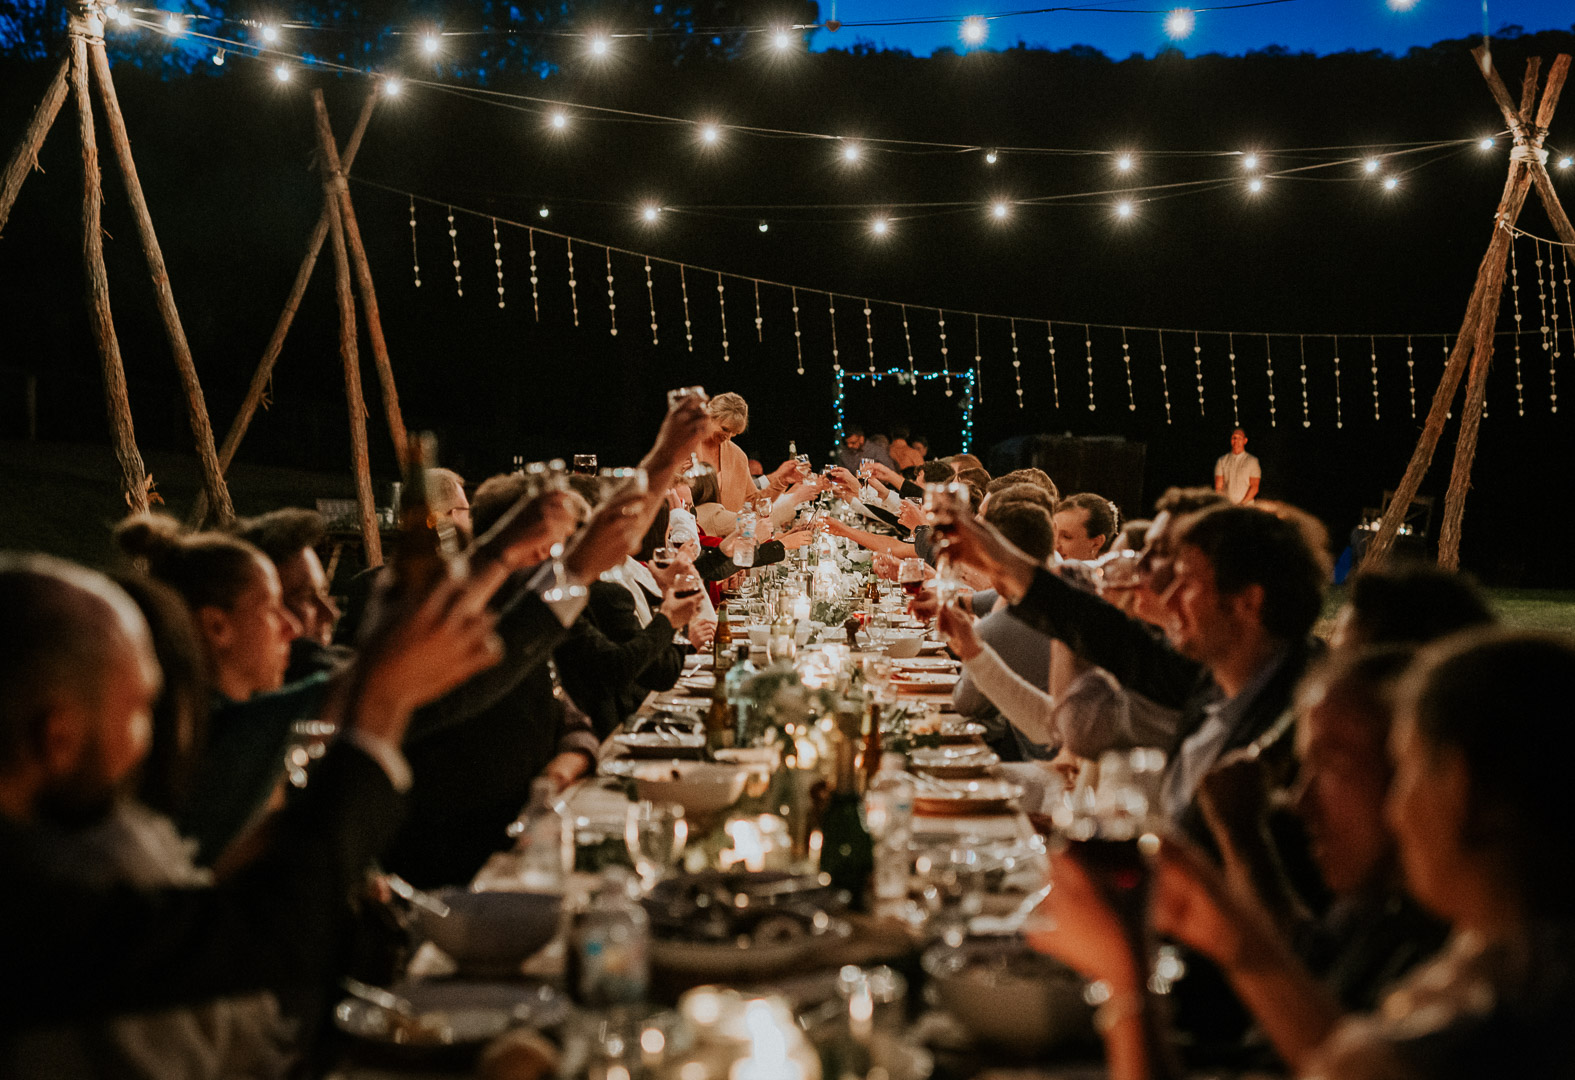 A photograph taken down a long table with guests either side all raising their glasses to cheers. Outdoors under fairy lights